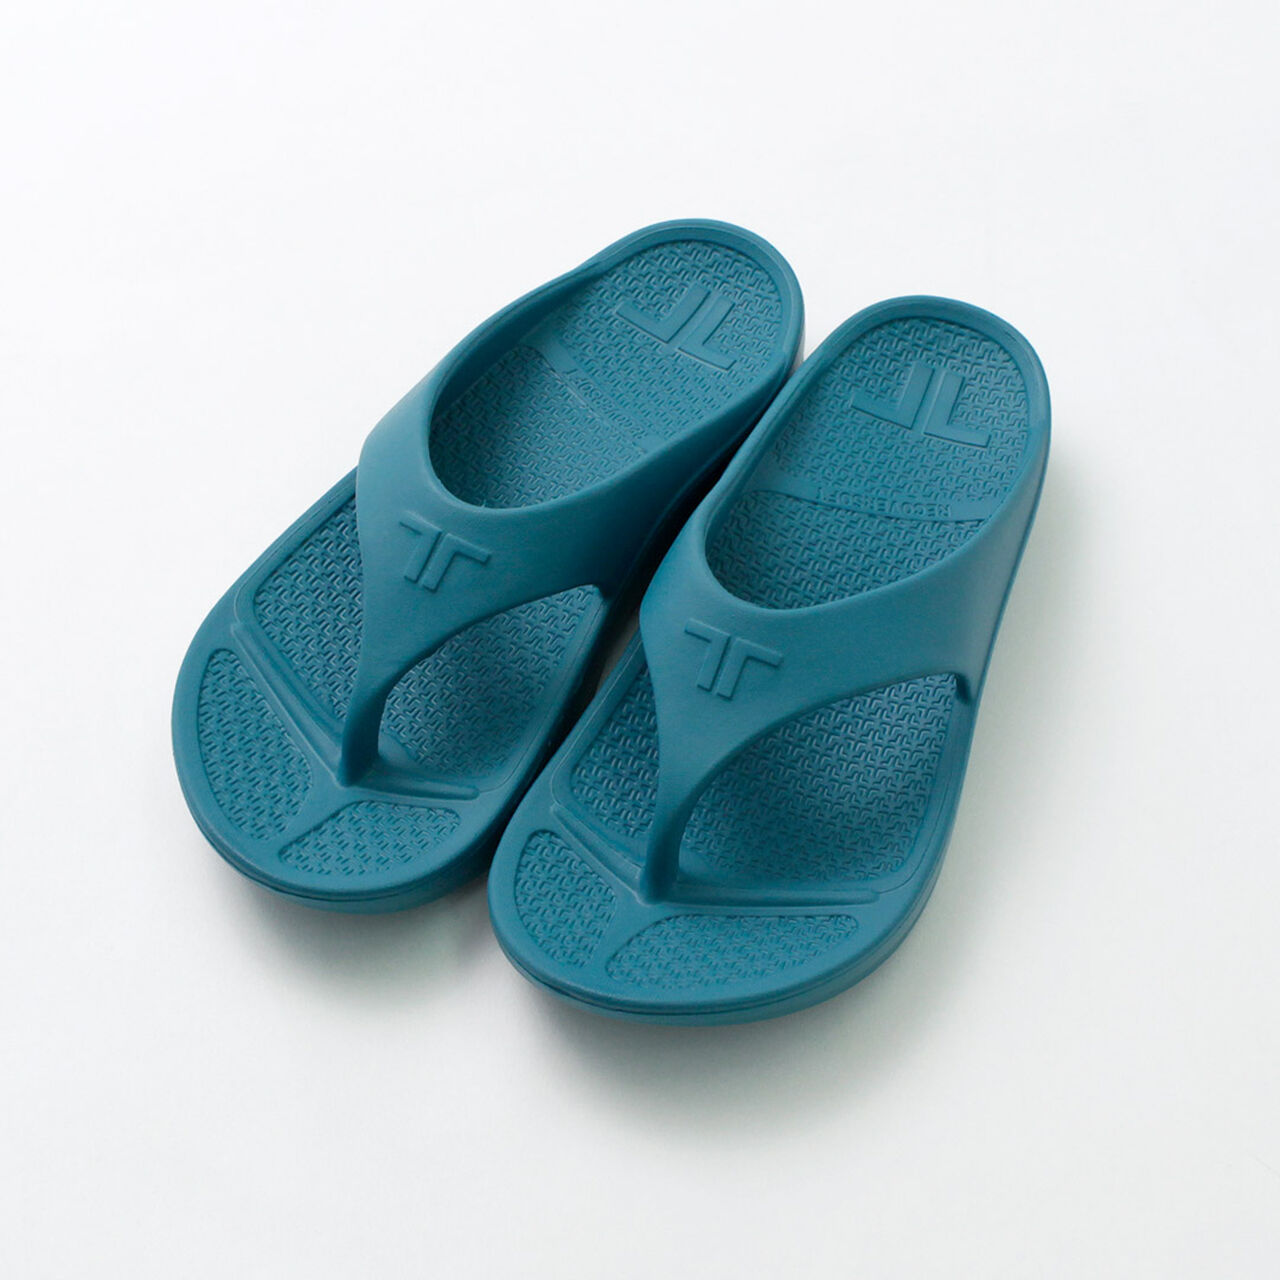 Flip Flop Recovery Sandals,TealBlue, large image number 0